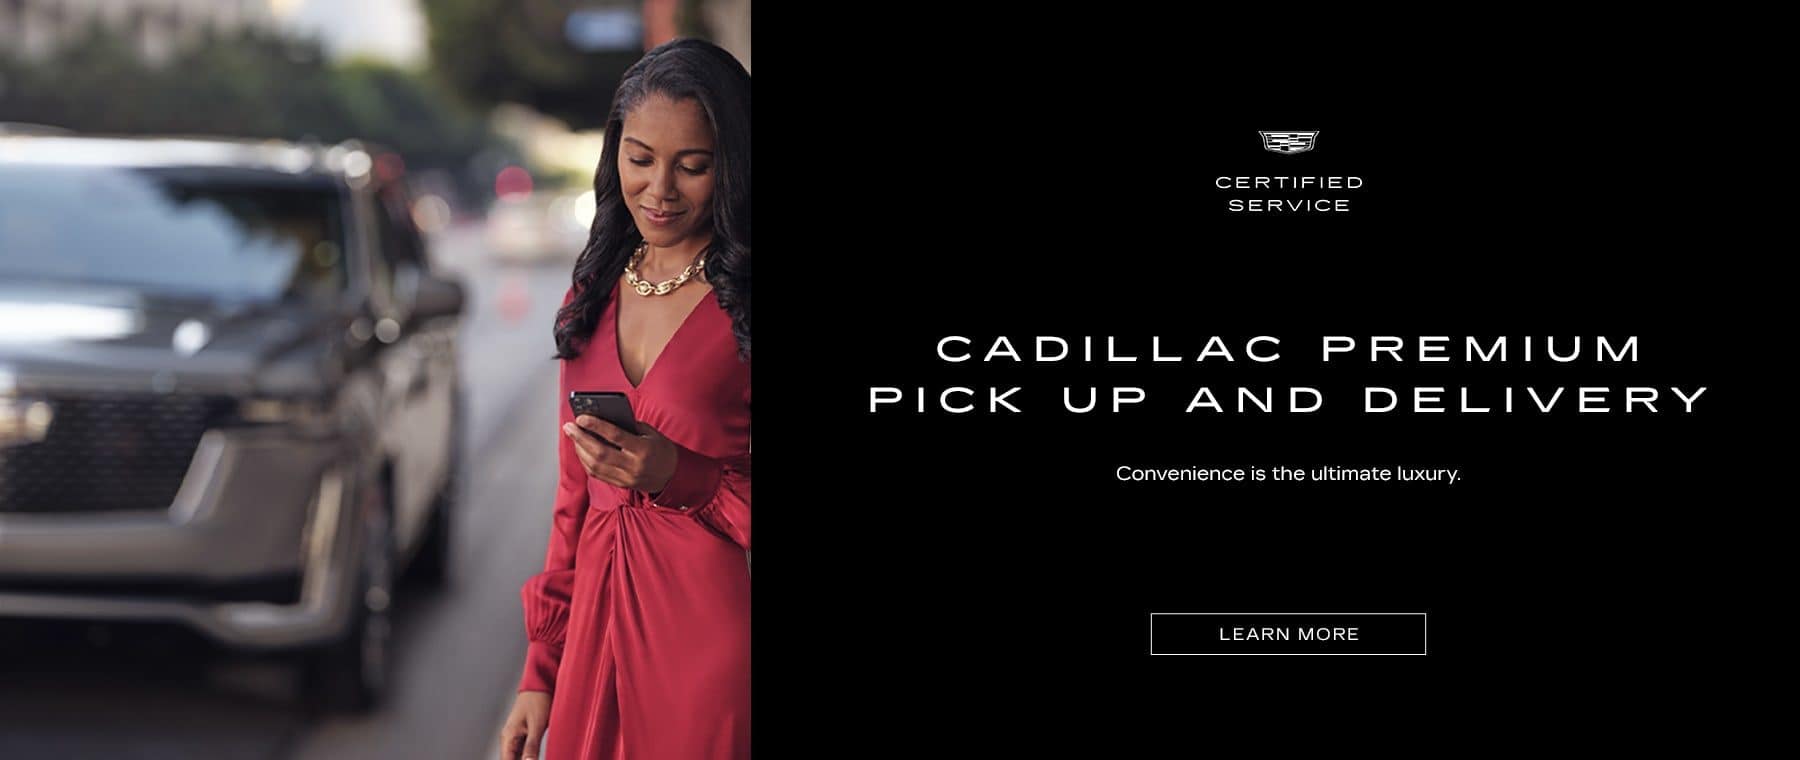 CADILLAC PREMIUM PICK UP AND DELIVERY* Convenience is the ultimate luxury.